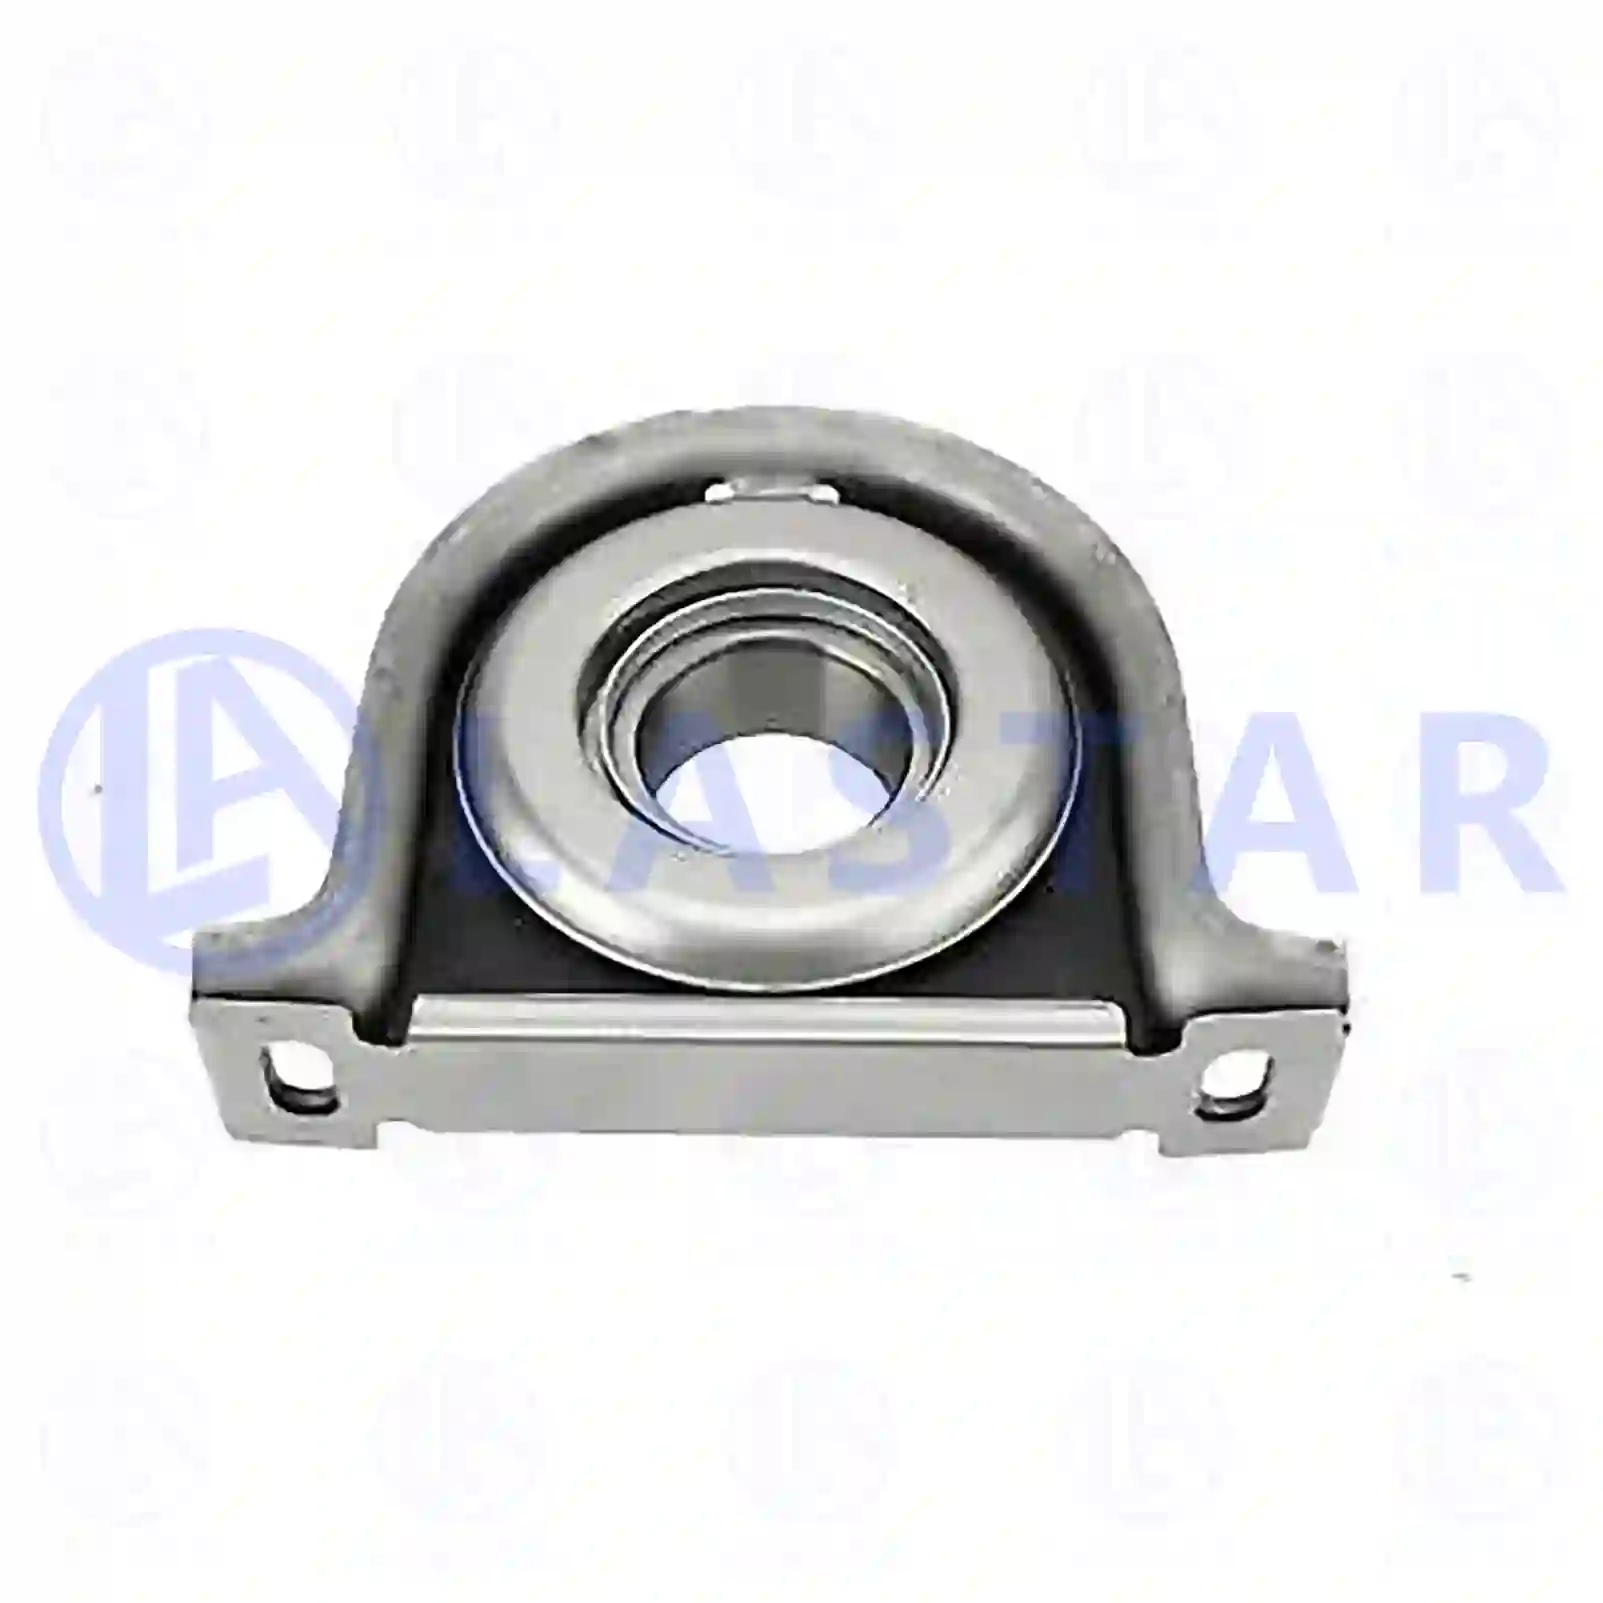 Center bearing, 77734323, 3397101 ||  77734323 Lastar Spare Part | Truck Spare Parts, Auotomotive Spare Parts Center bearing, 77734323, 3397101 ||  77734323 Lastar Spare Part | Truck Spare Parts, Auotomotive Spare Parts